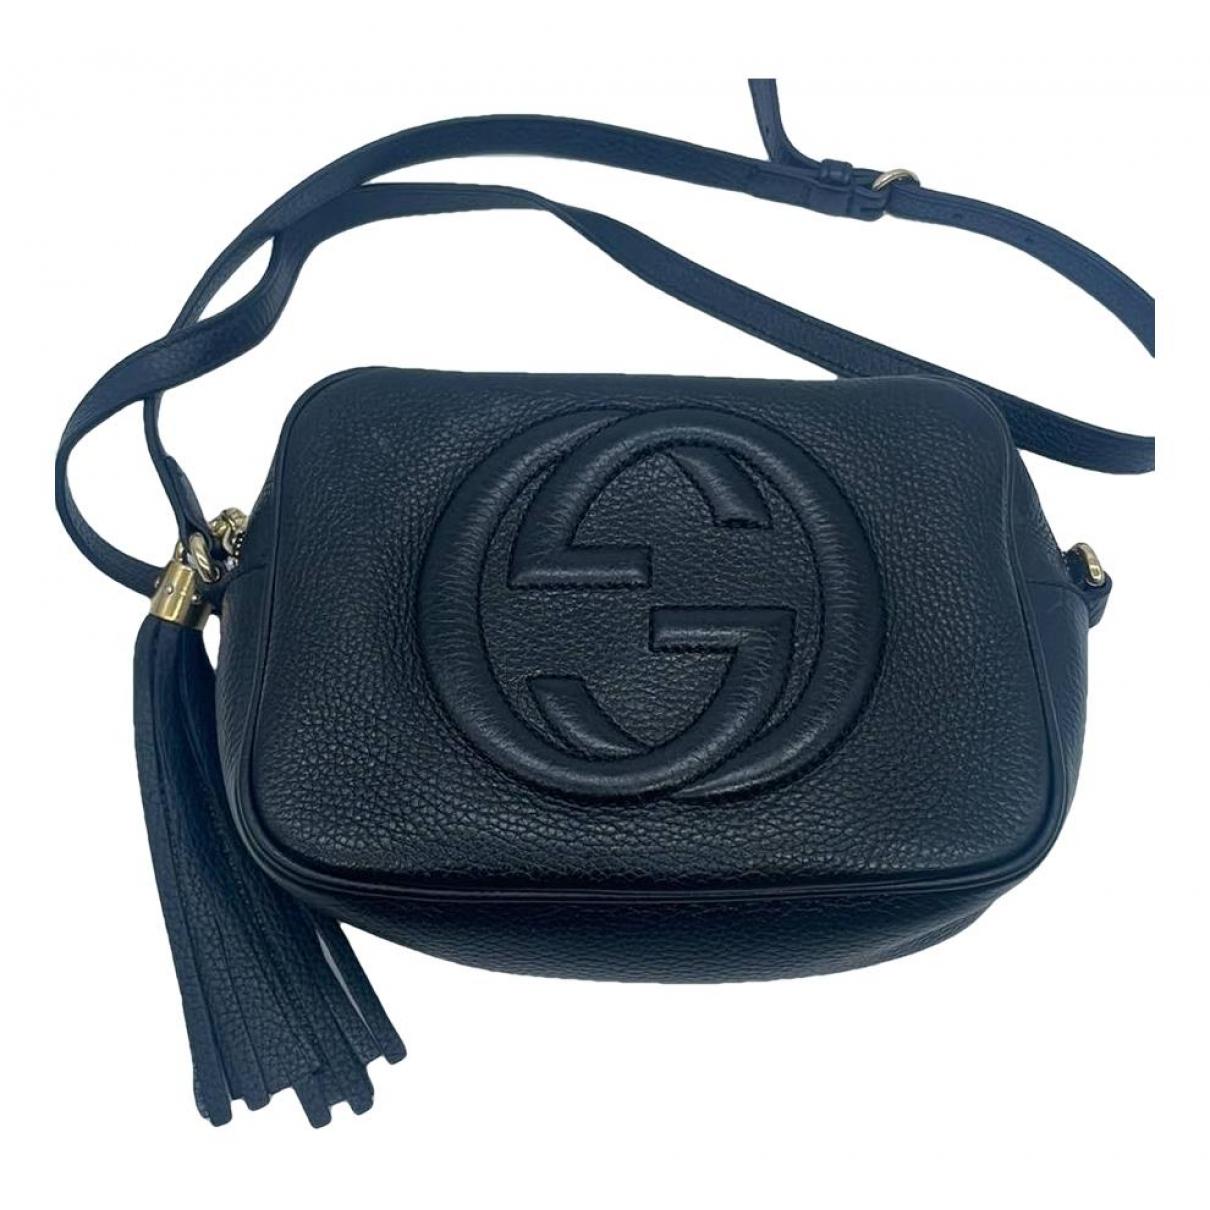 Gucci Soho Leather Cross-body Bag in Brown